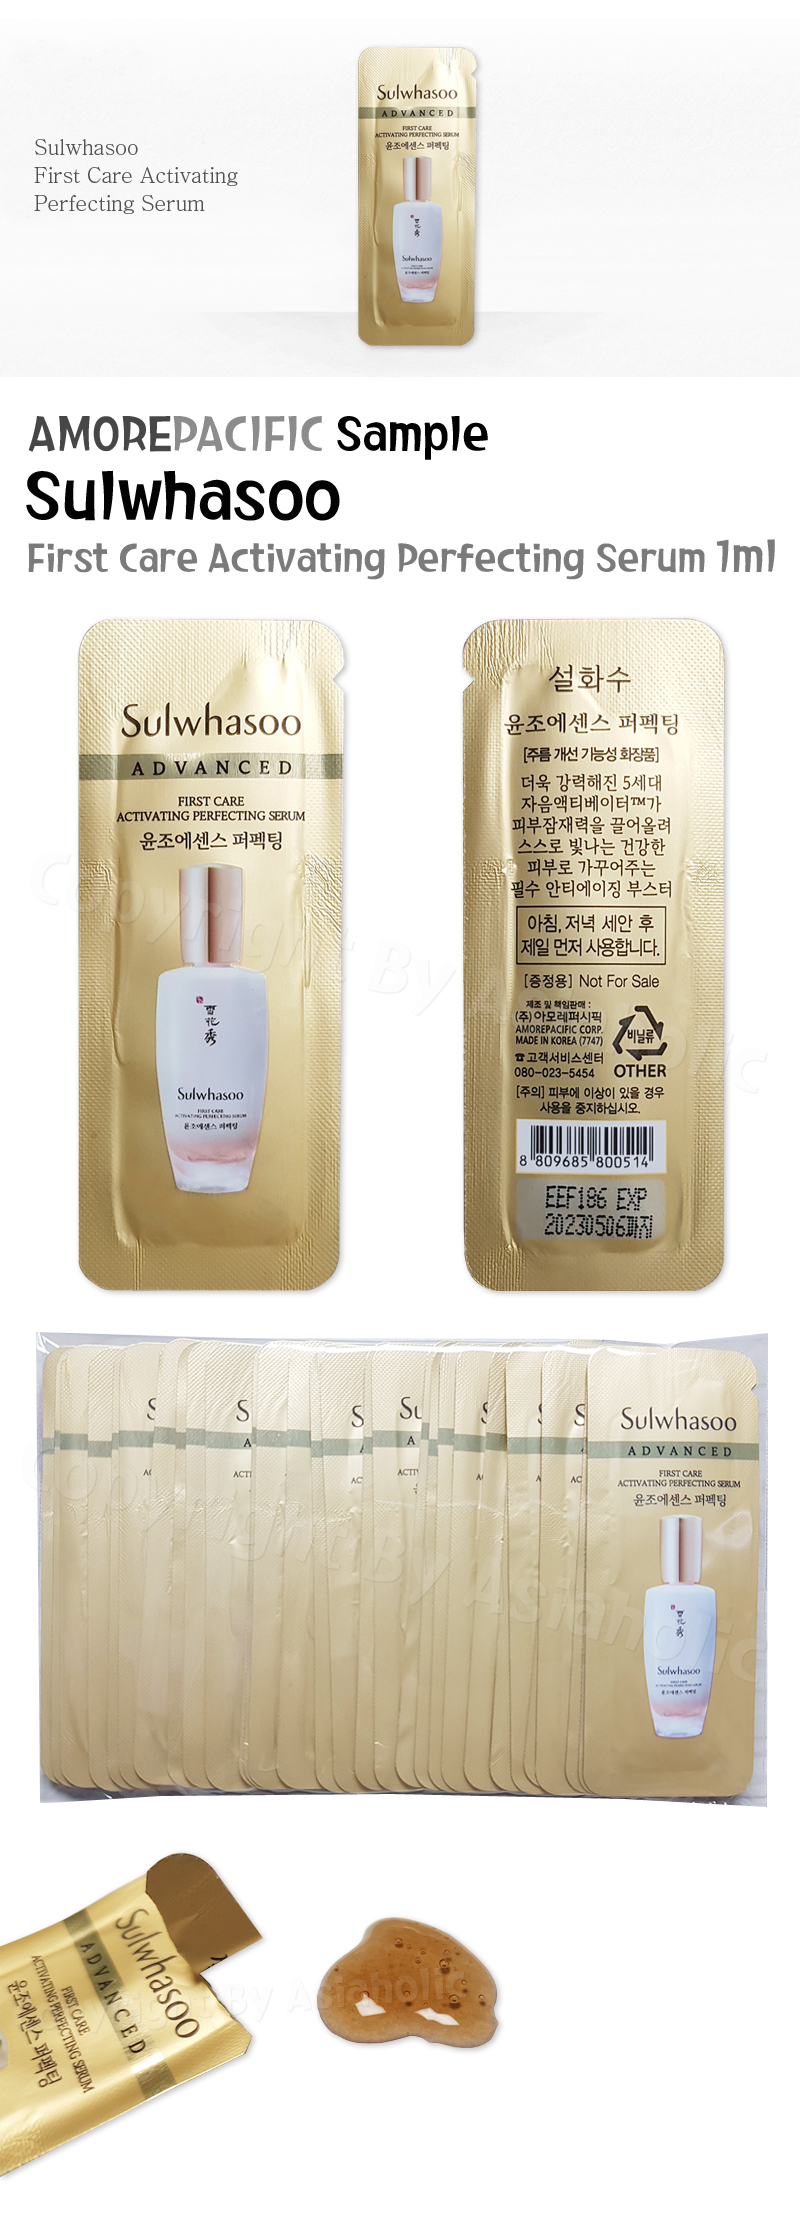 Sulwhasoo First Care Activating Perfecting Serum 1ml x 30pcs (30ml) Sample Newest Version